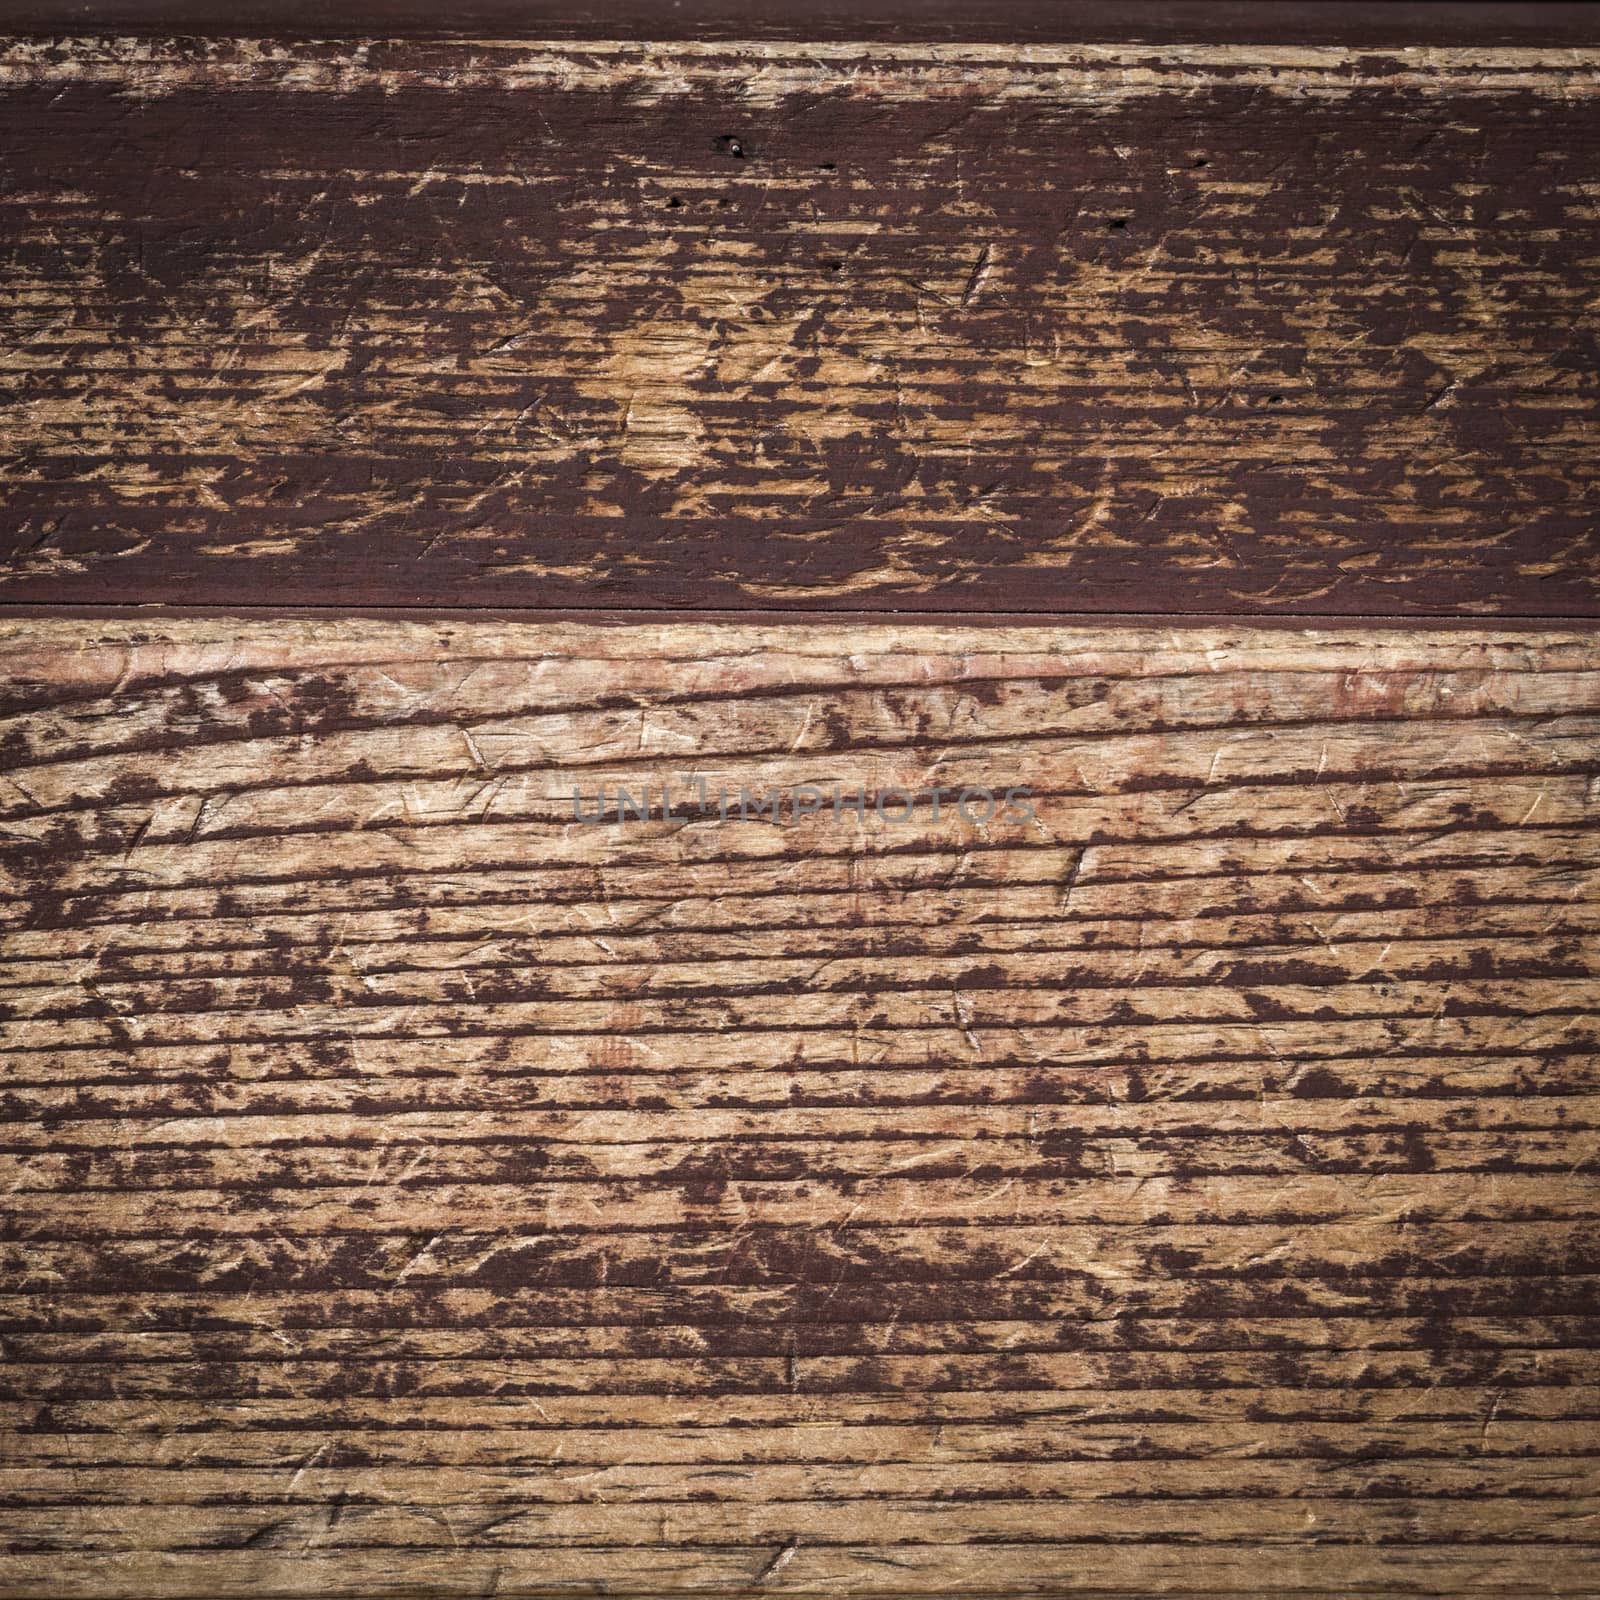 Wood aged vintage background and texture